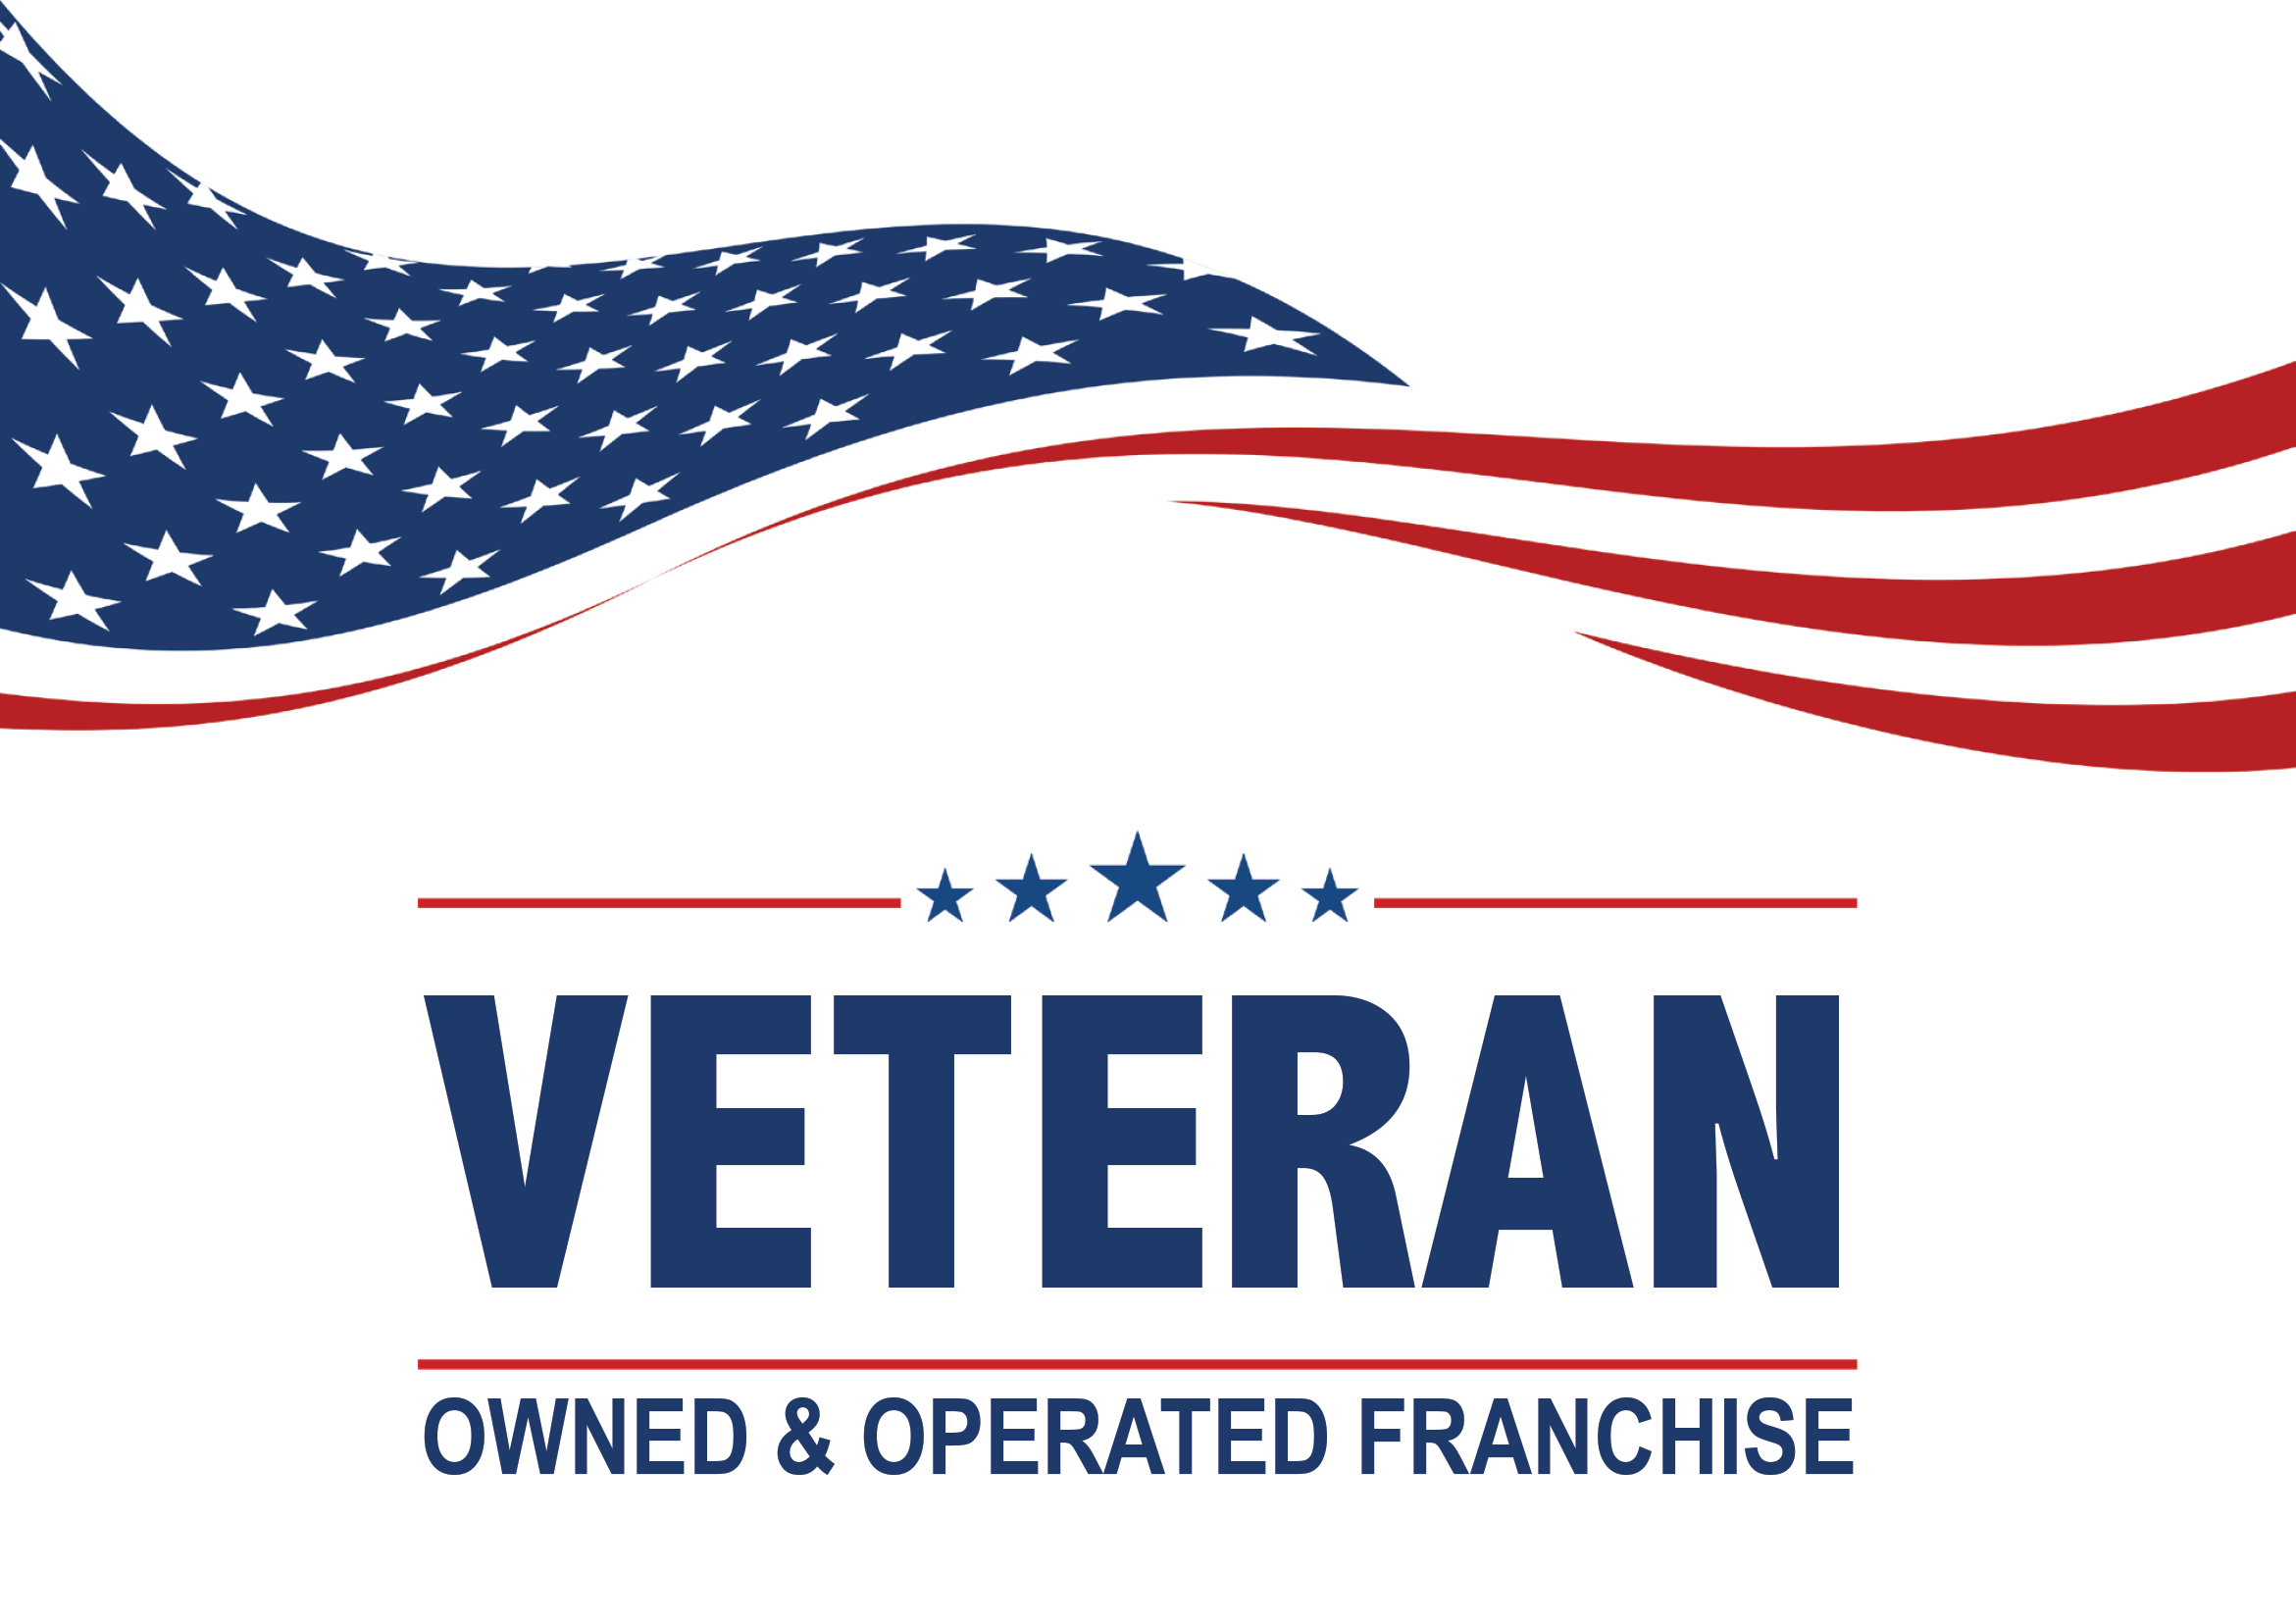 Veteran Owned and Operated Franchise graphic